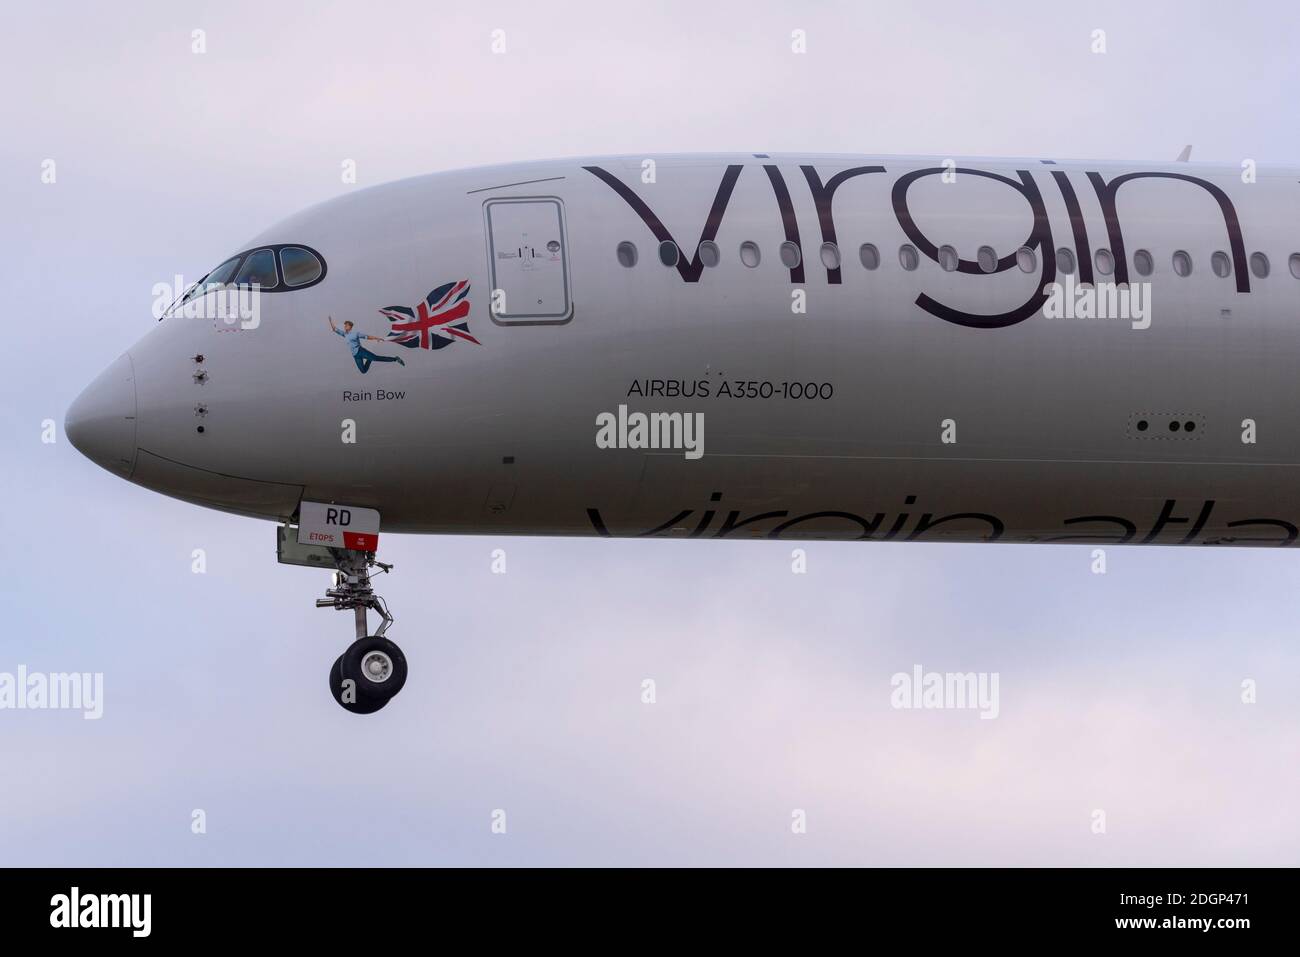 London Heathrow Airport, London, UK. 9th Dec, 2020. Overnight rain has cleared into a cloudy cool morning as the first arrivals land at Heathrow. One of the early arrivals was Virgin Atlantic's Airbus A350 named Rain Bow in support of LGBTQ+. Gay pride Stock Photo